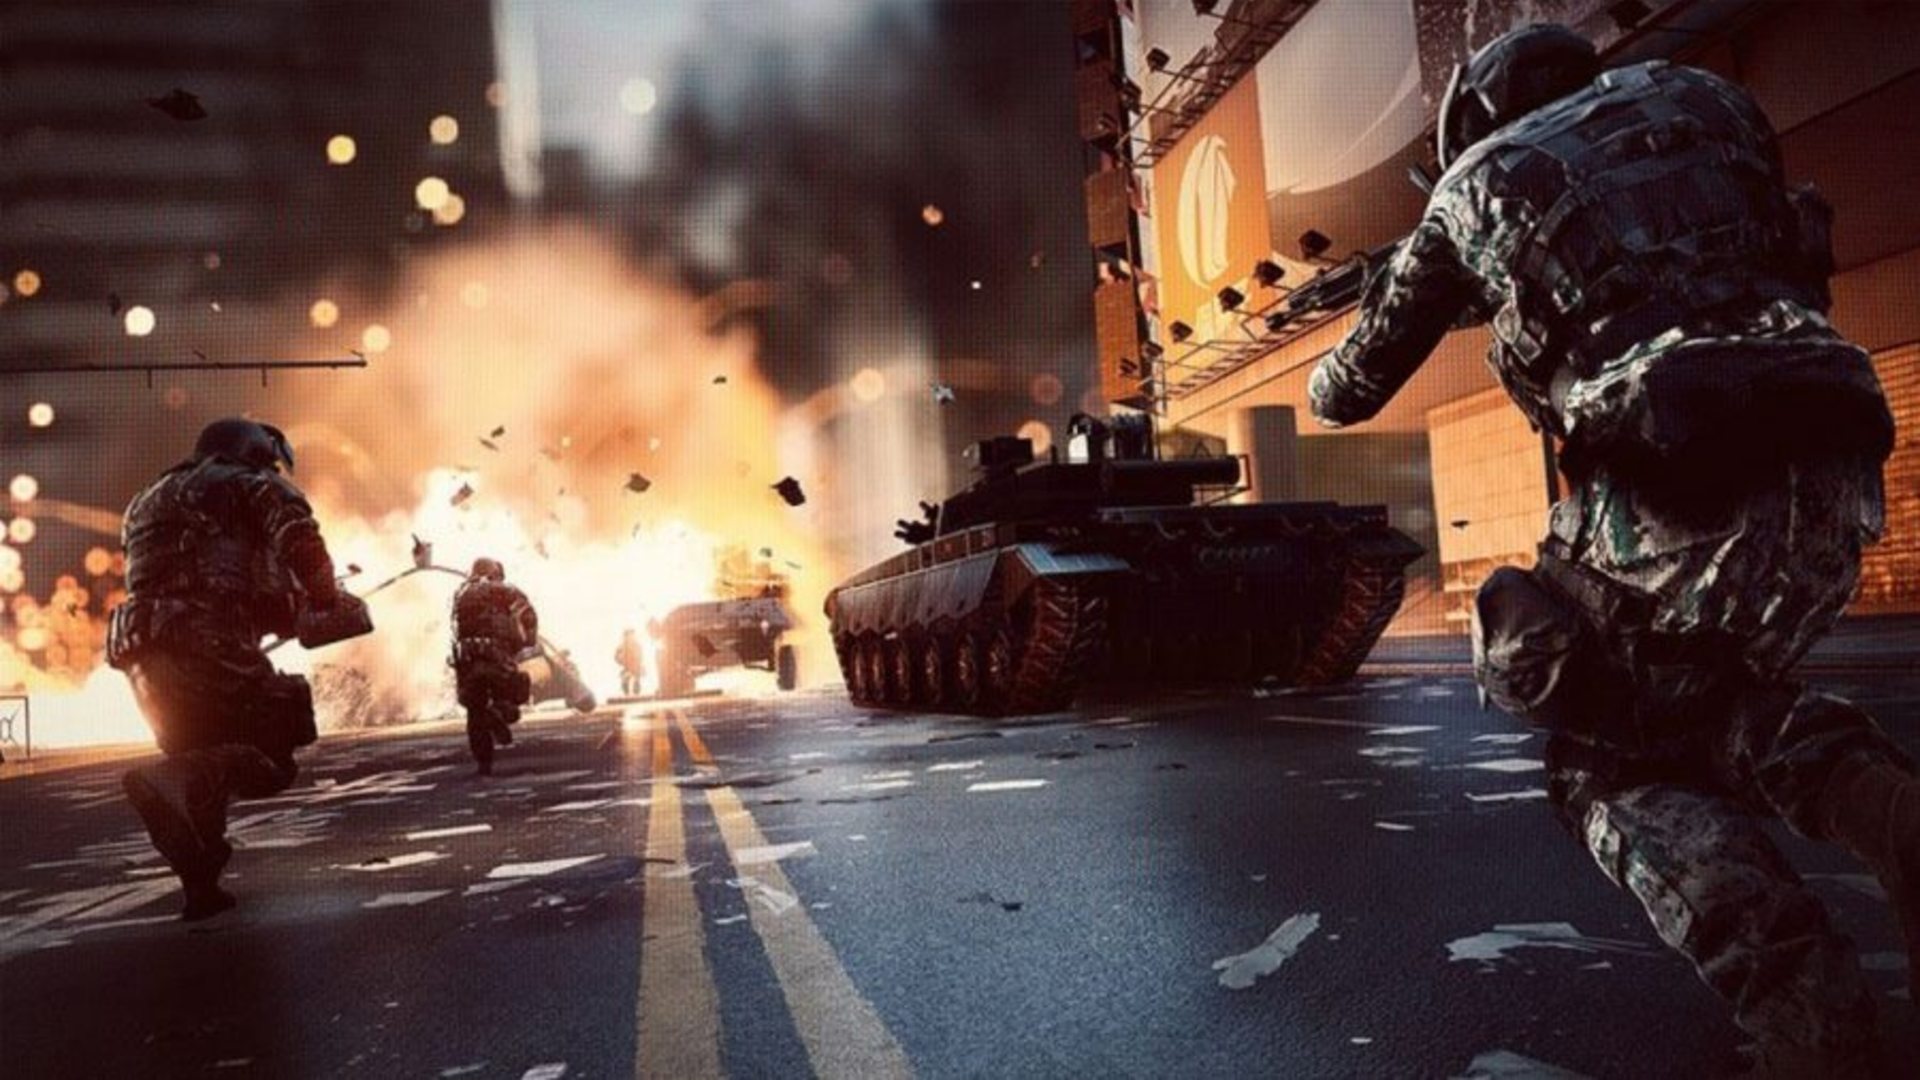 Best tank games: Battlefield 2042. Image shows soldiers and tanks on city streets. Also there is an explosion.